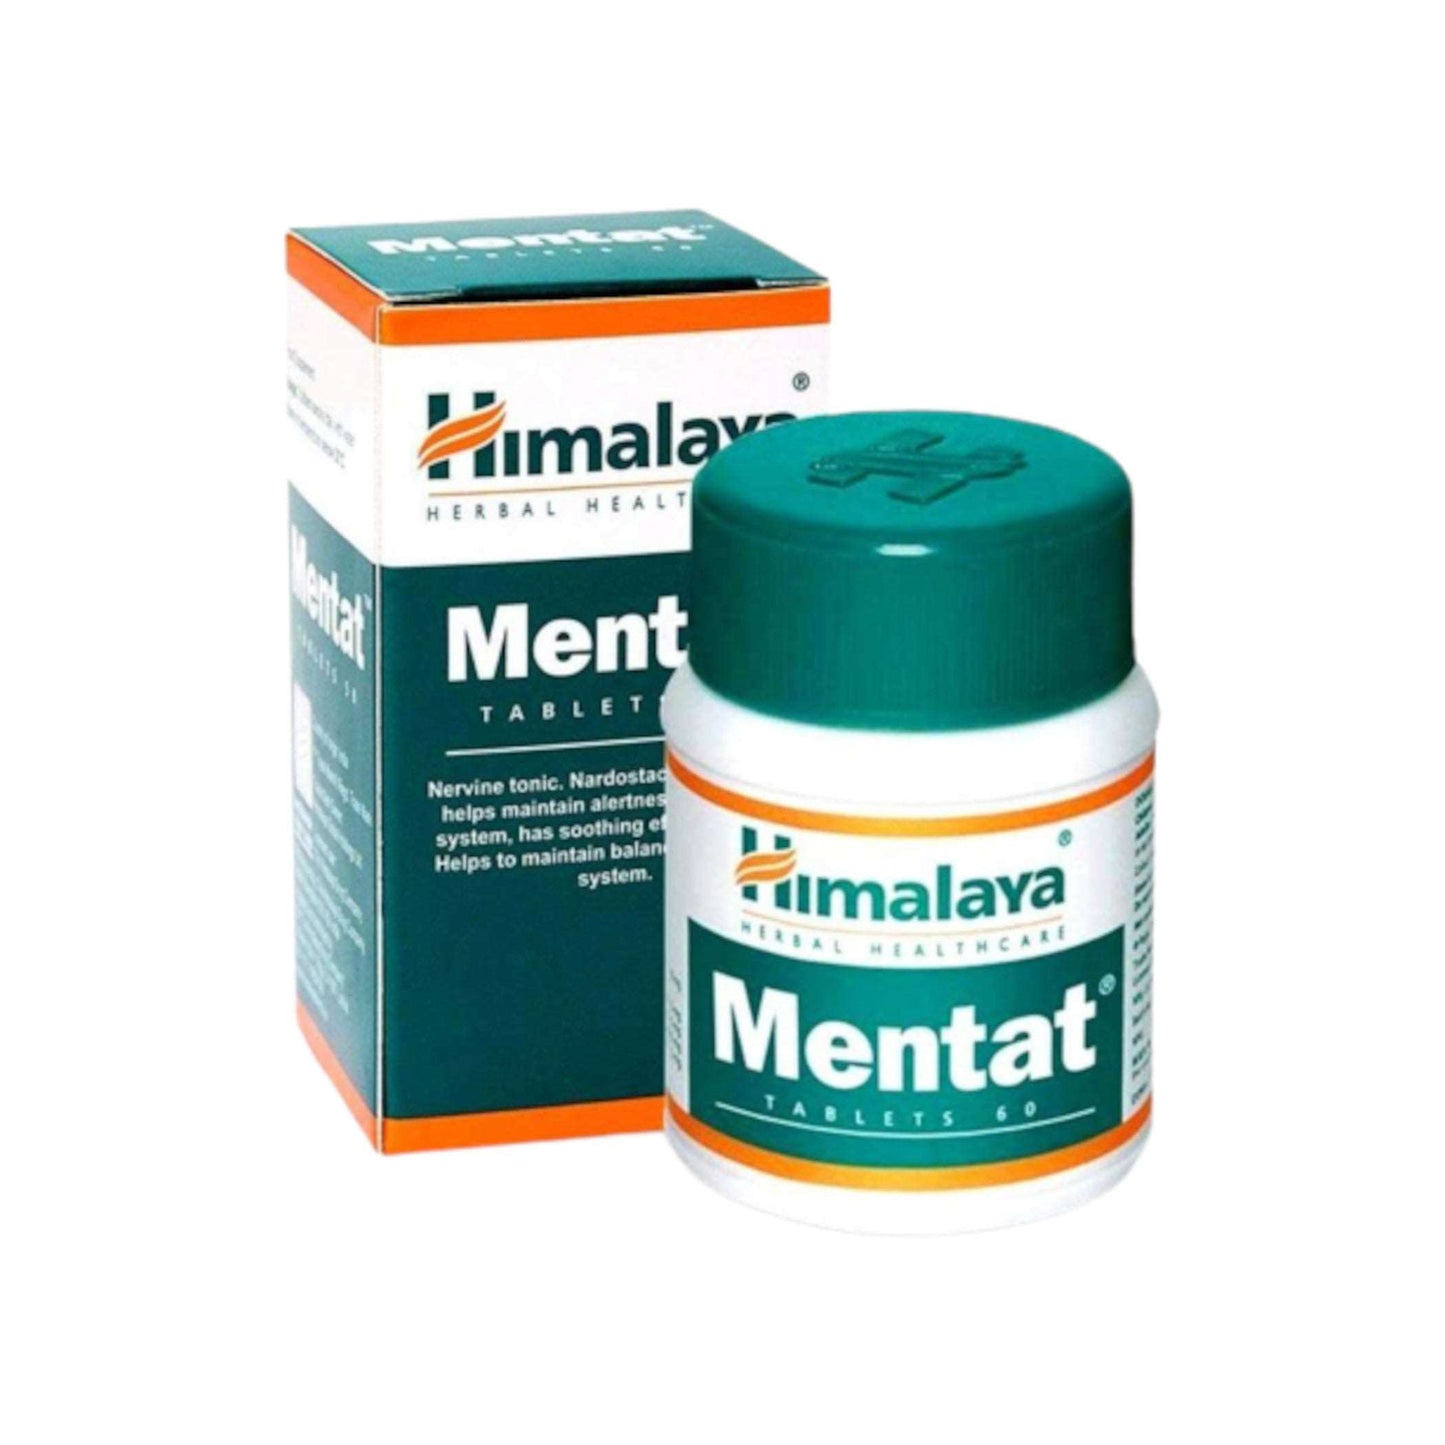 Image: Himalaya Herbals Mentat 60 Tablets: Ayurvedic brain and memory support for focus, mental clarity, and cognitive function.